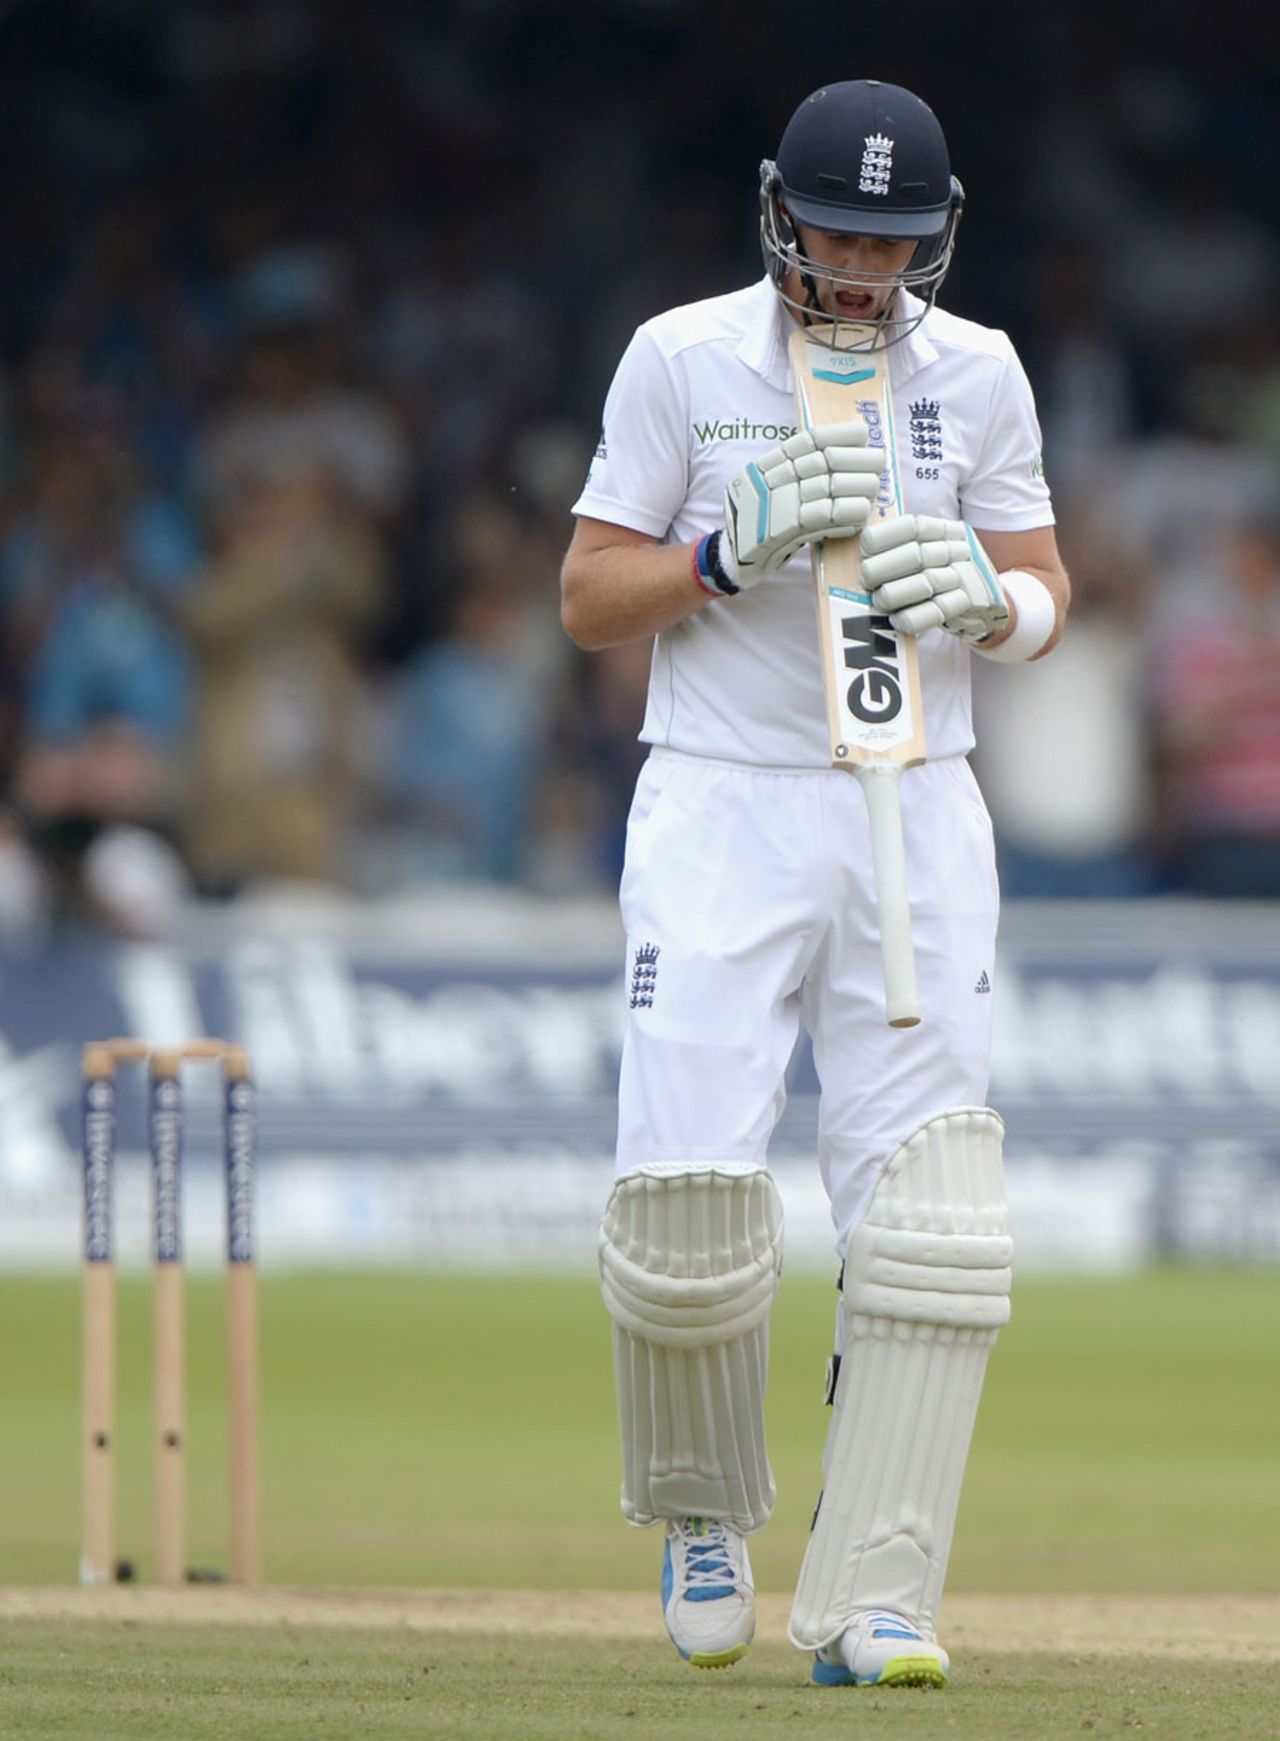 Joe Root trudges off after being caught on the boundary, England v India, 2nd Investec Test, Lord's, 5th day, July 21, 2014